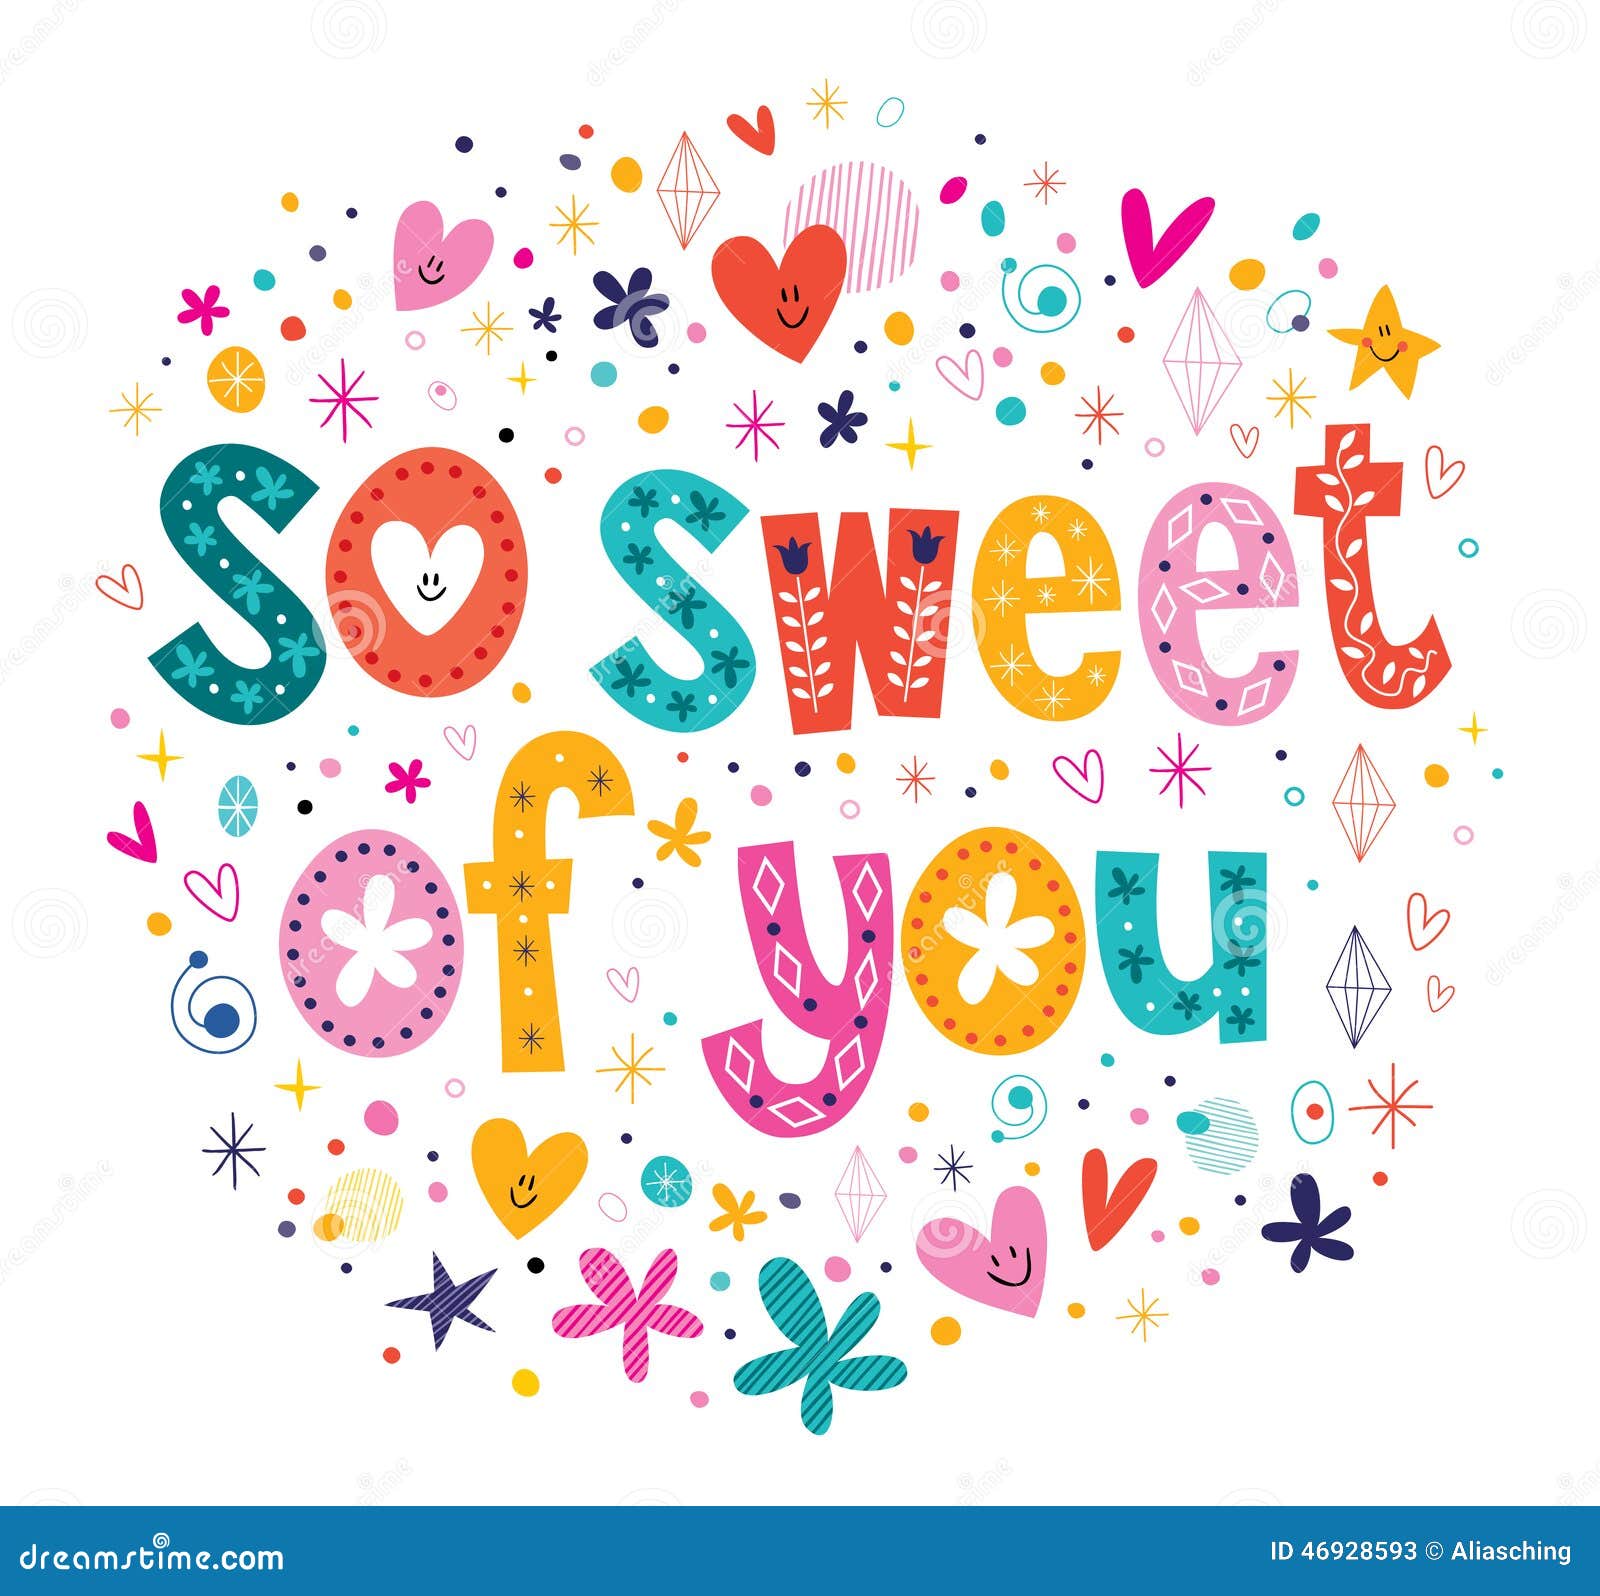 So Sweet Of You Stock Vector Illustration Of Letter